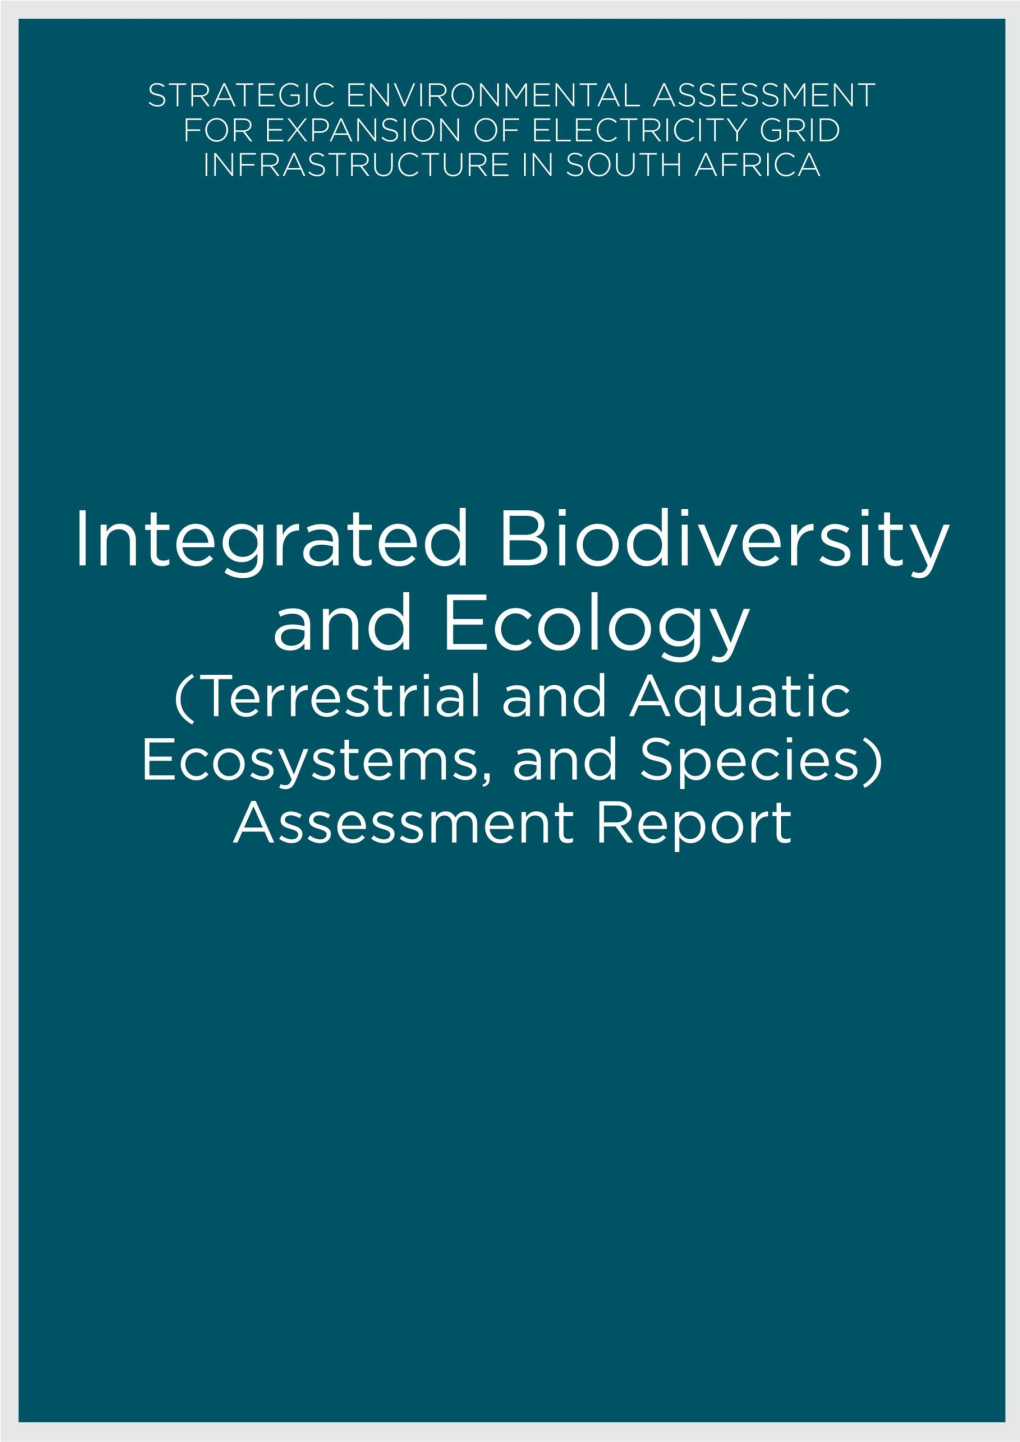 3.4. Integrated Biodiversity and Ecology Assessment